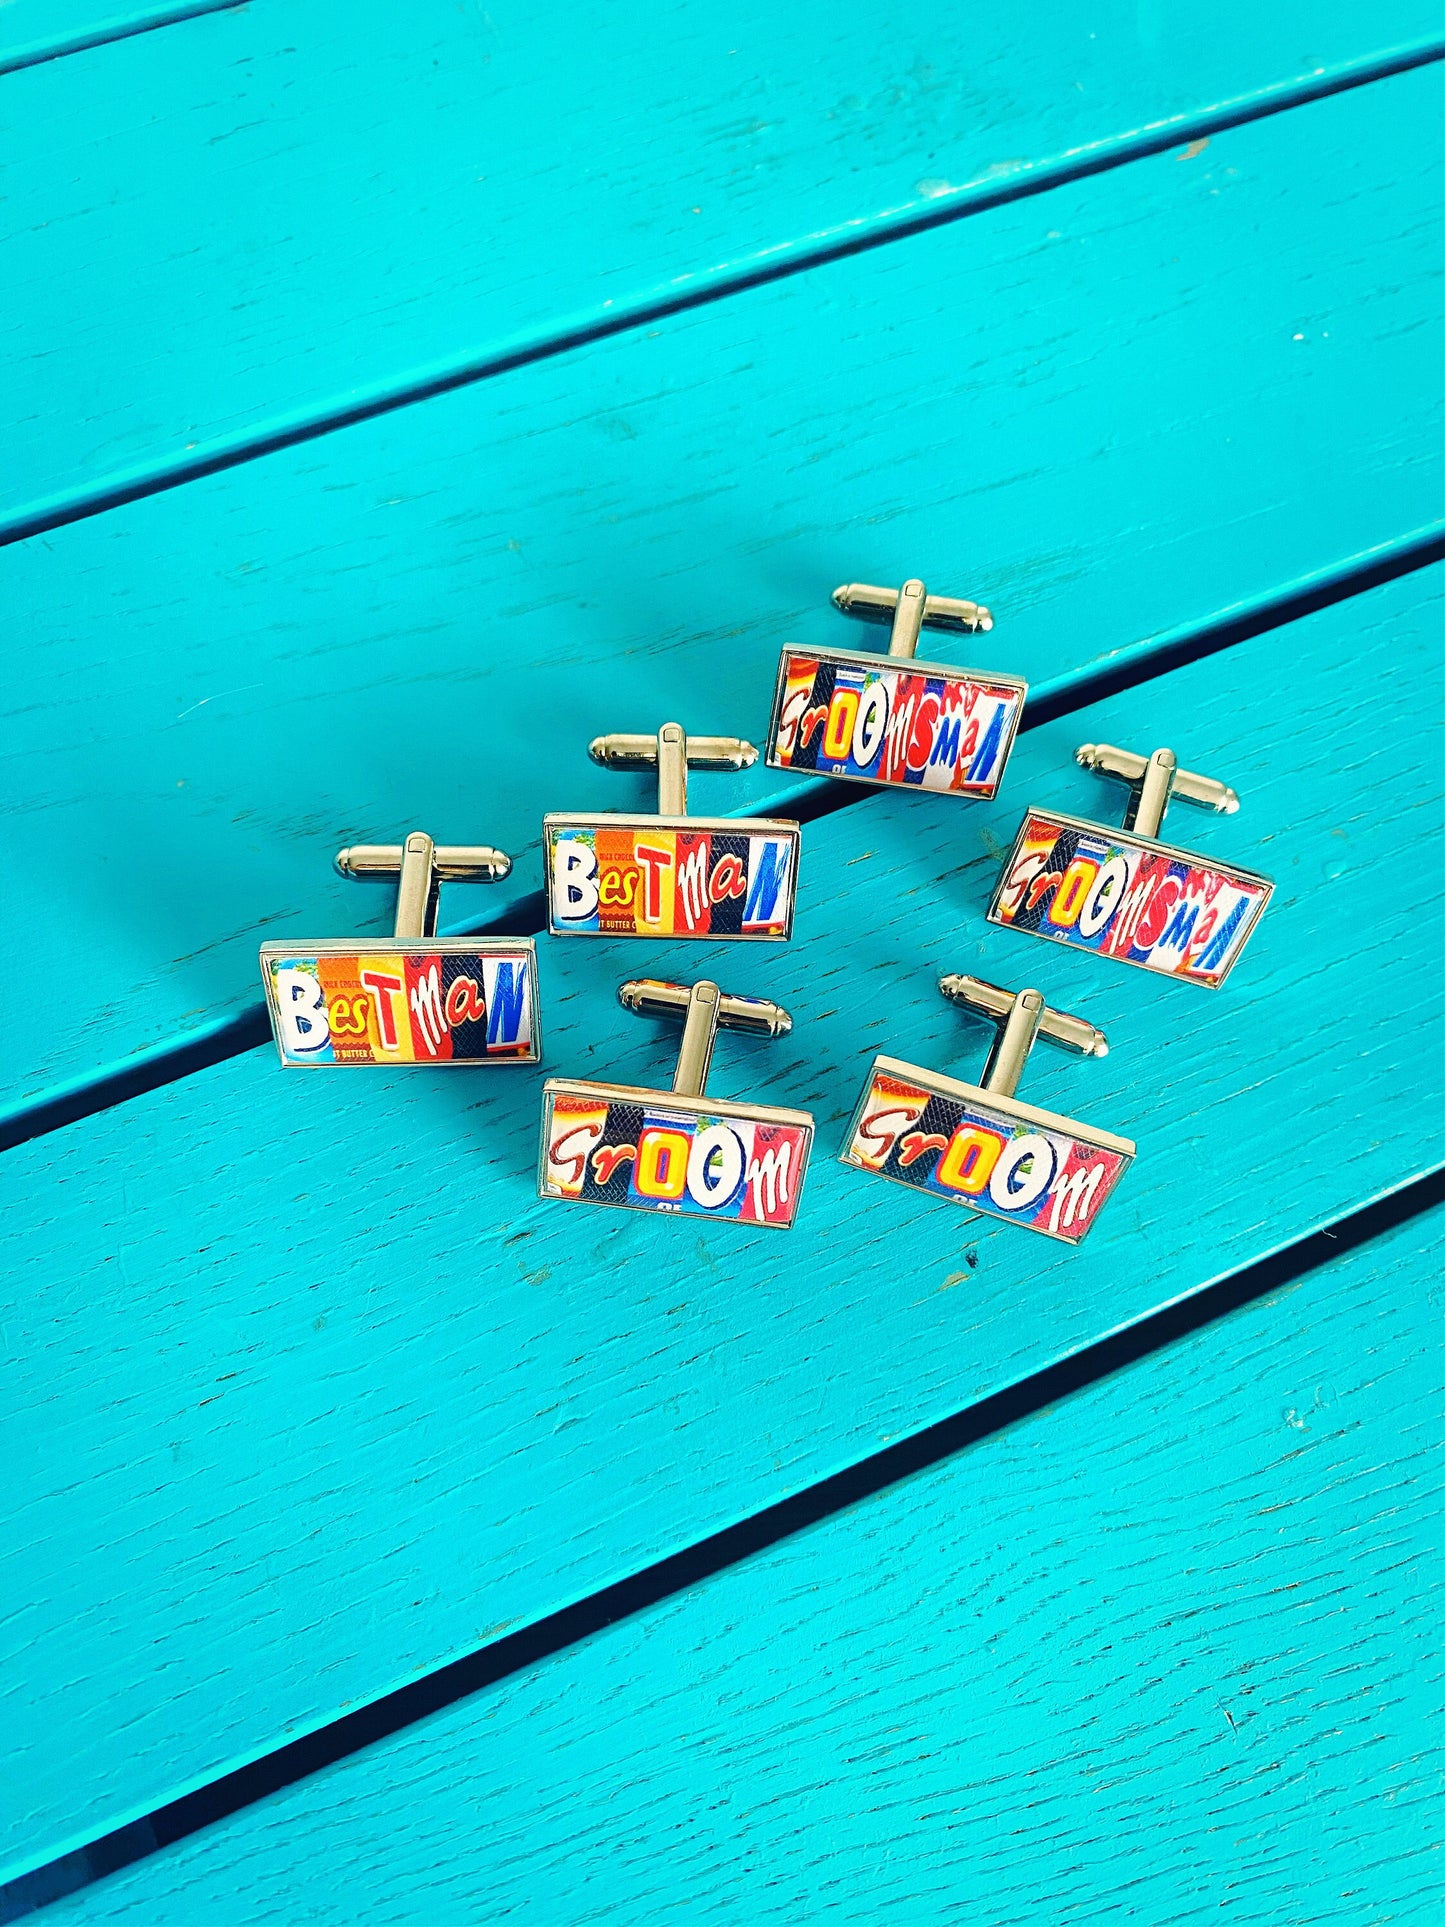 Custom Film TV Title Cufflinks. Personalised Name with Movie Font. Groom Best Man Groomsmen. Your Name. Novelty Tie Bar. Iconic Film Poster.